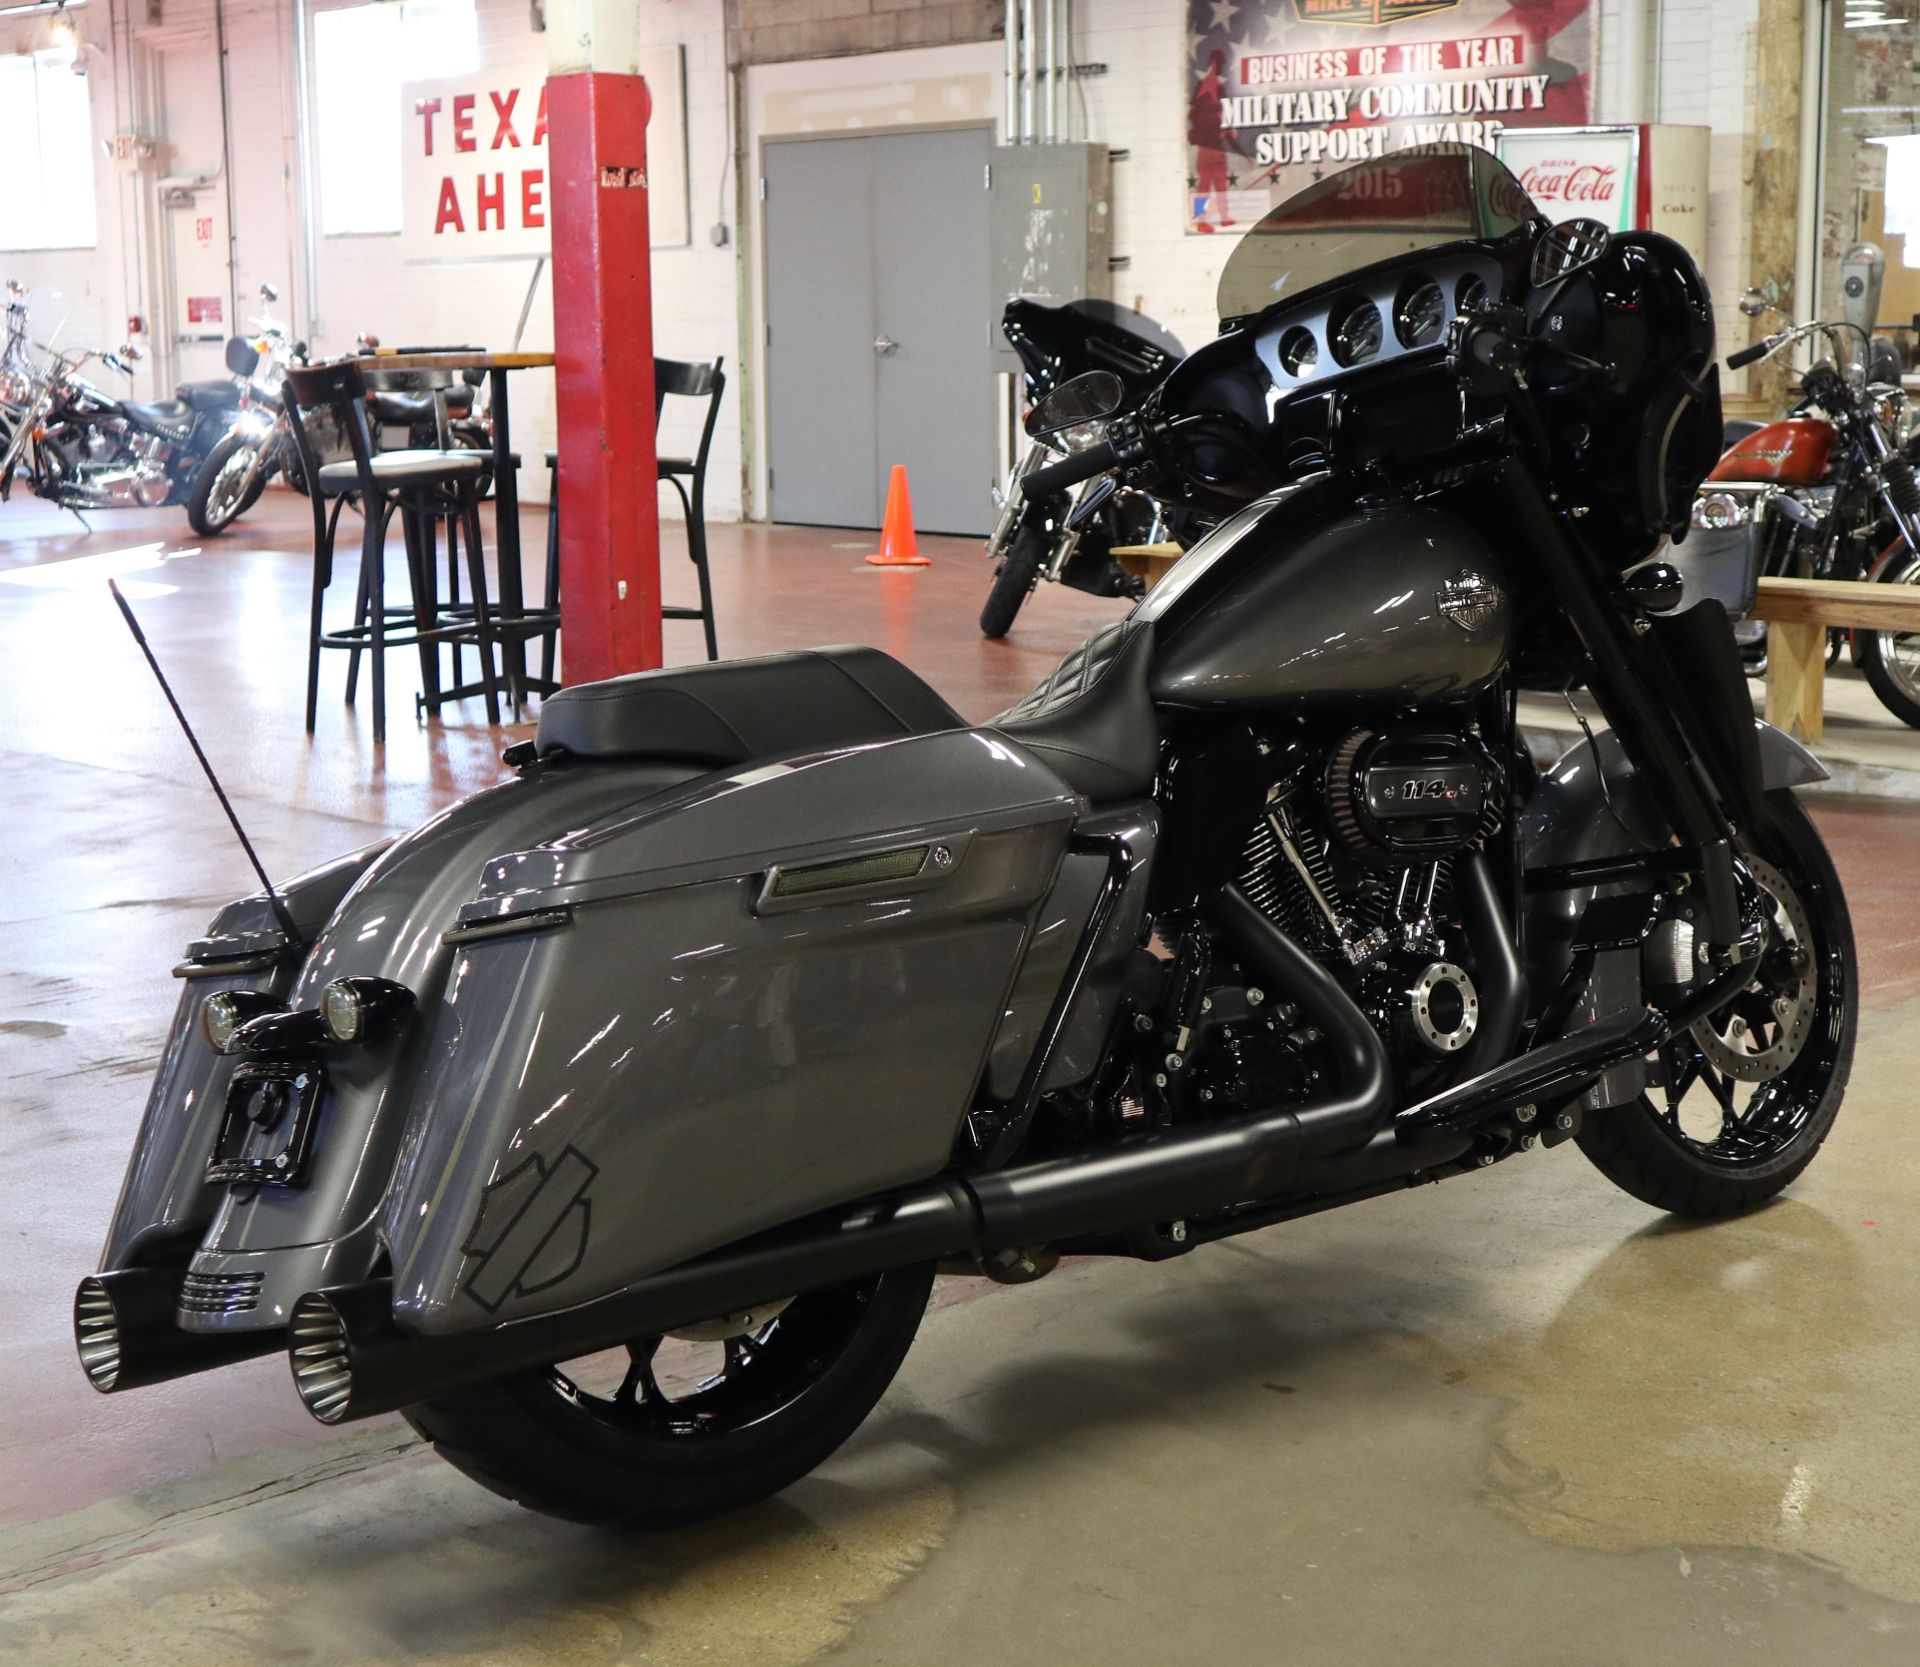 2021 Harley-Davidson Street Glide® Special in New London, Connecticut - Photo 8